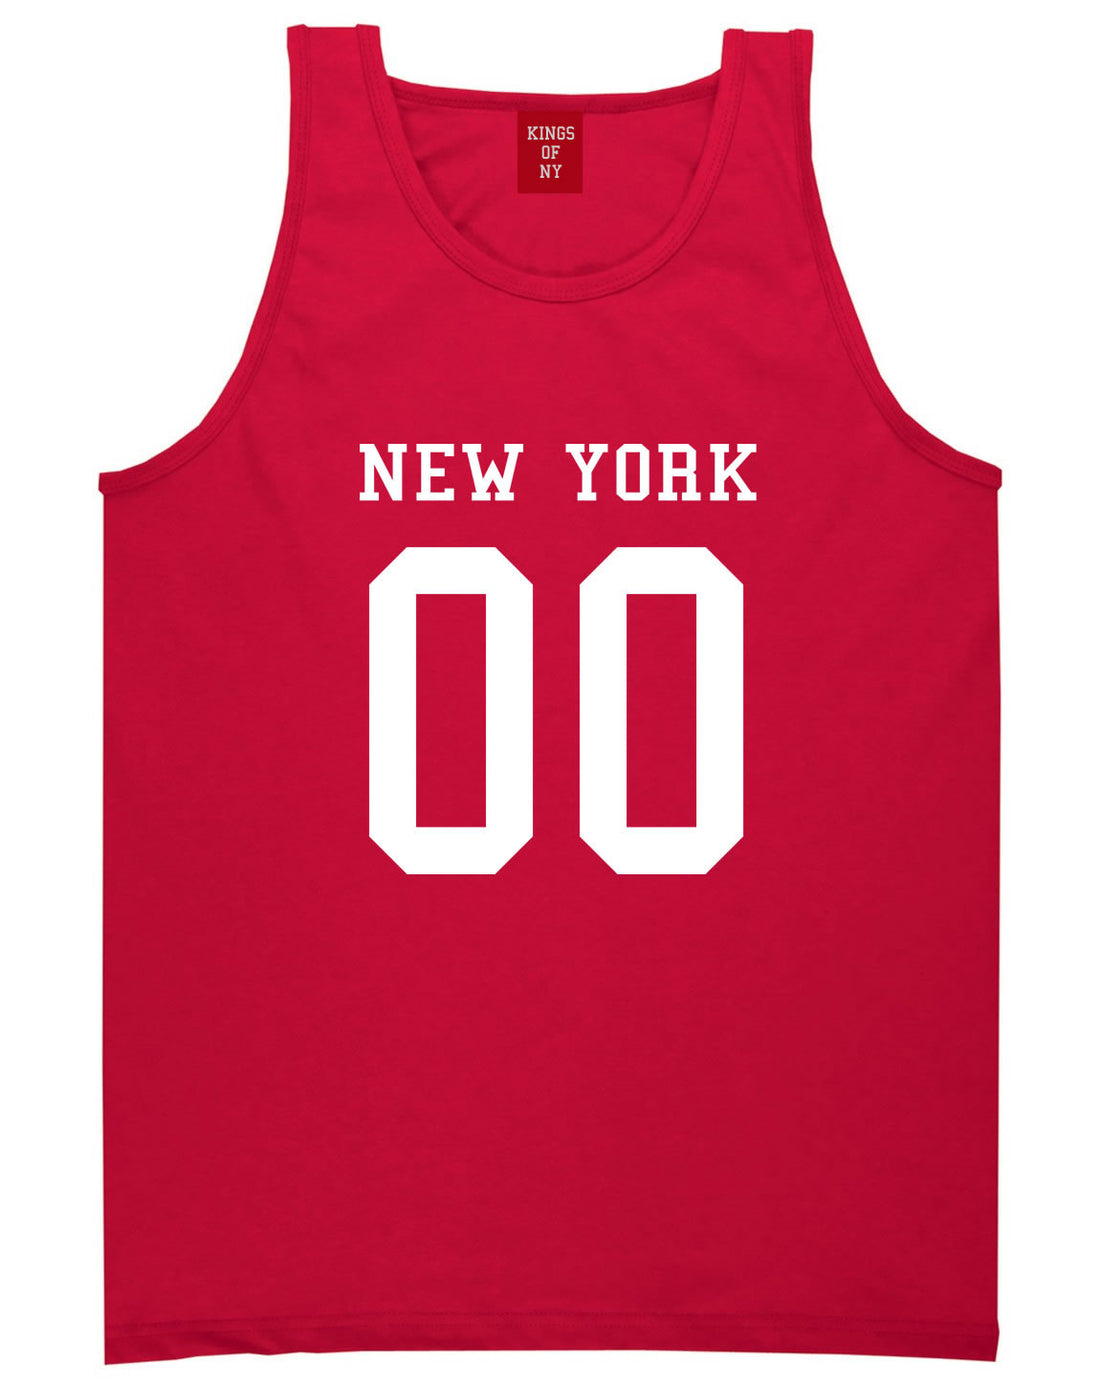 New York Team 00 Jersey Tank Top in Red By Kings Of NY